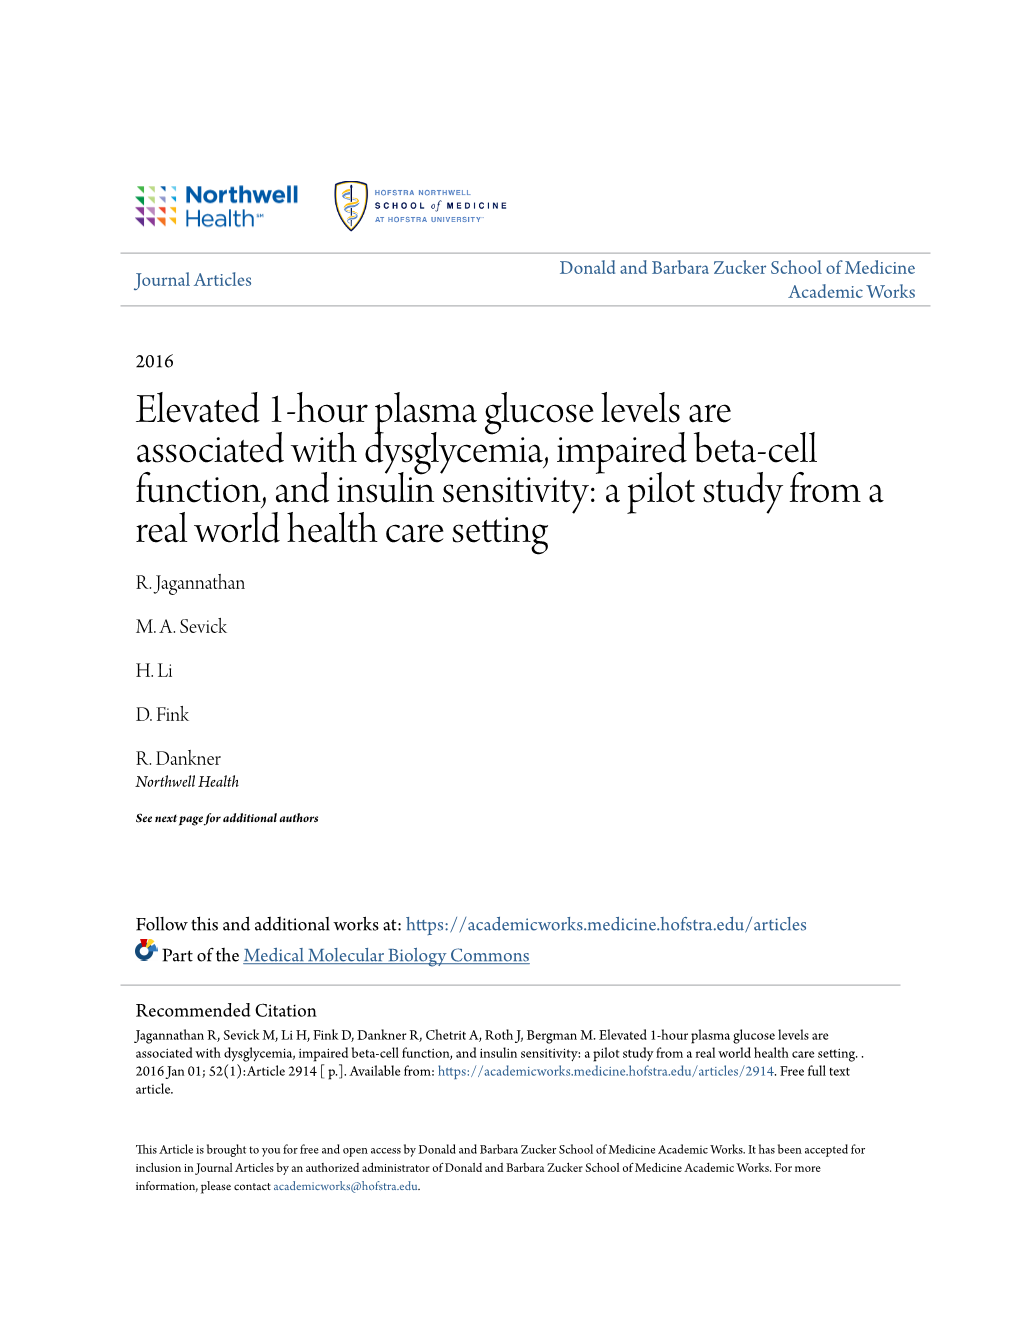 Elevated 1-Hour Plasma Glucose Levels Are Associated With